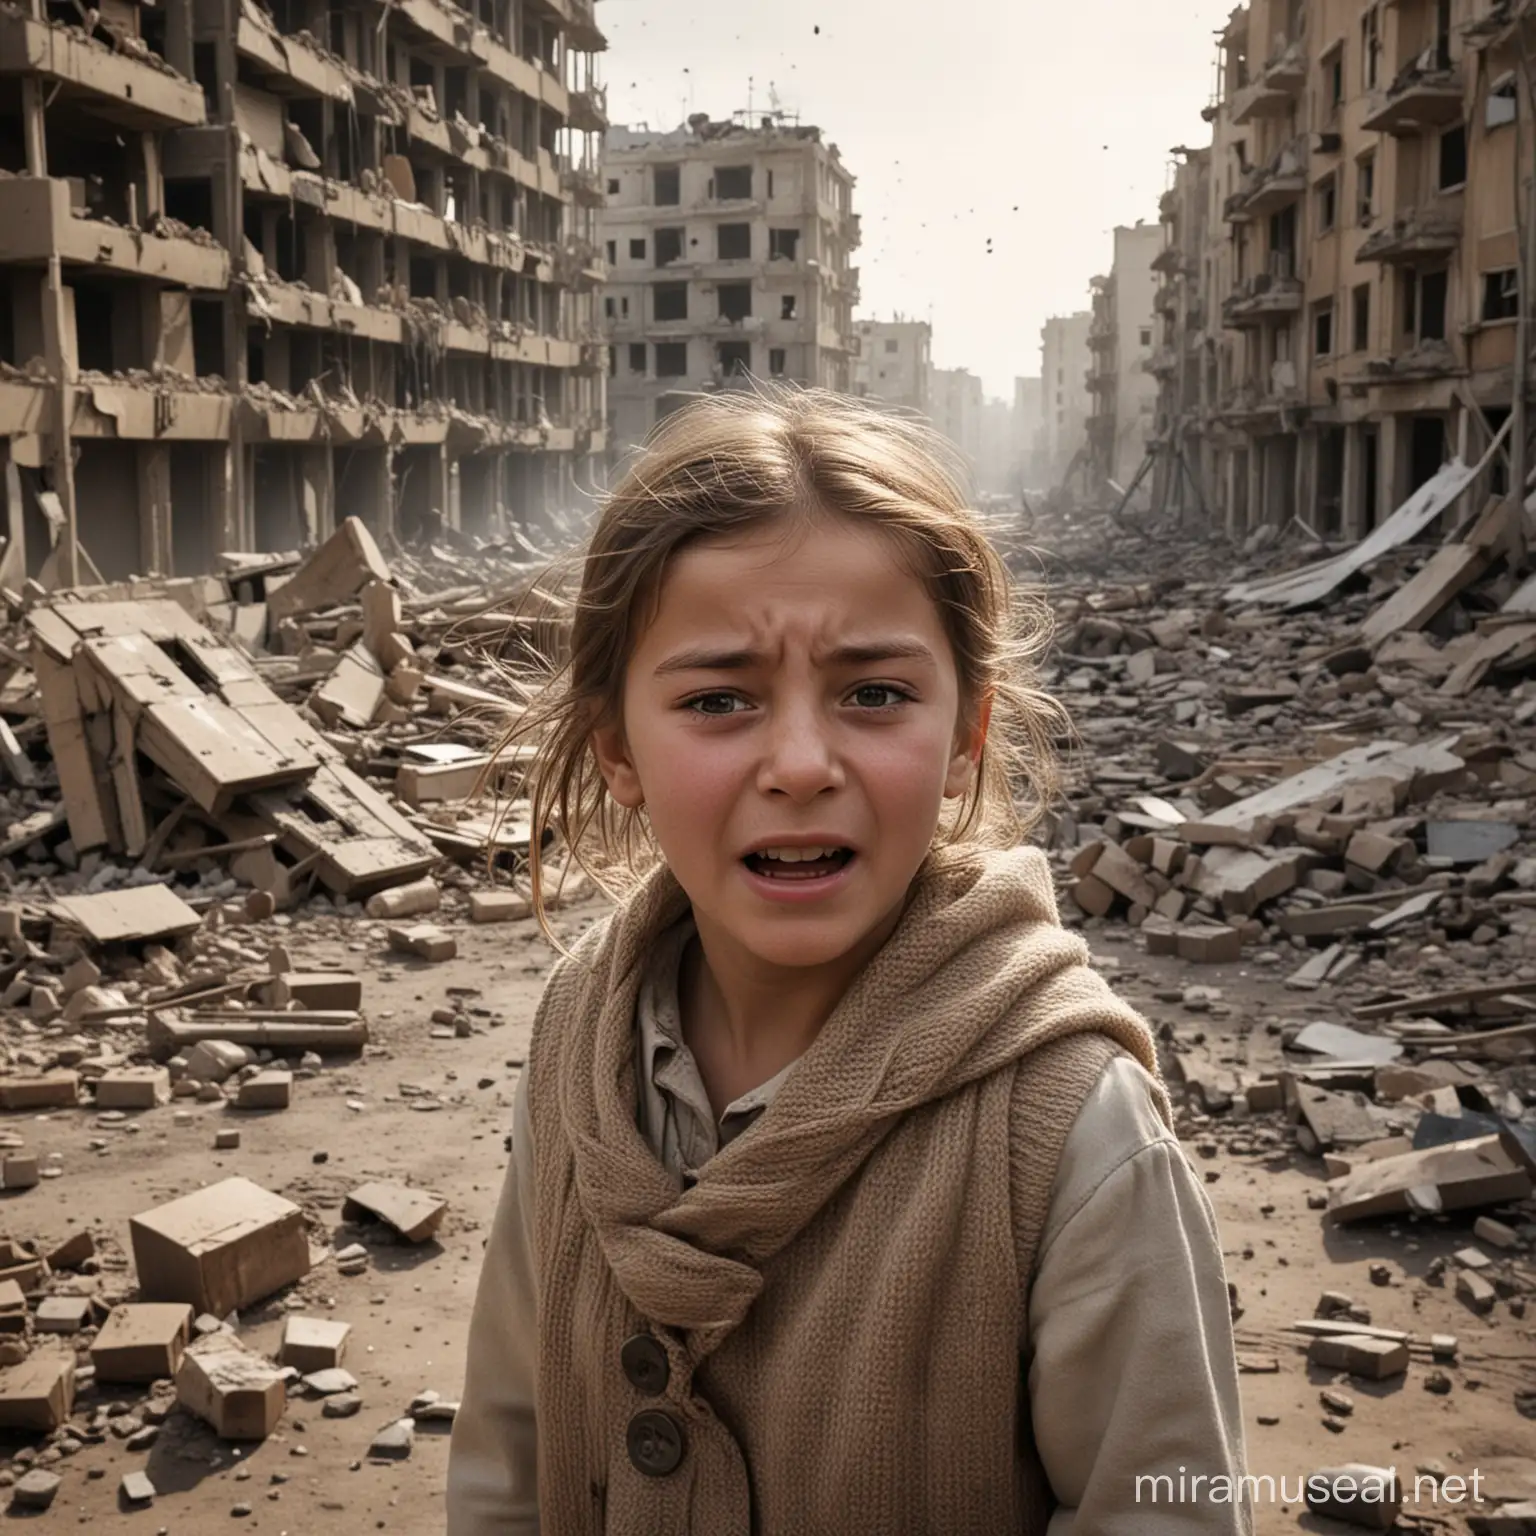 Distressed Young Girl Amidst War Destruction